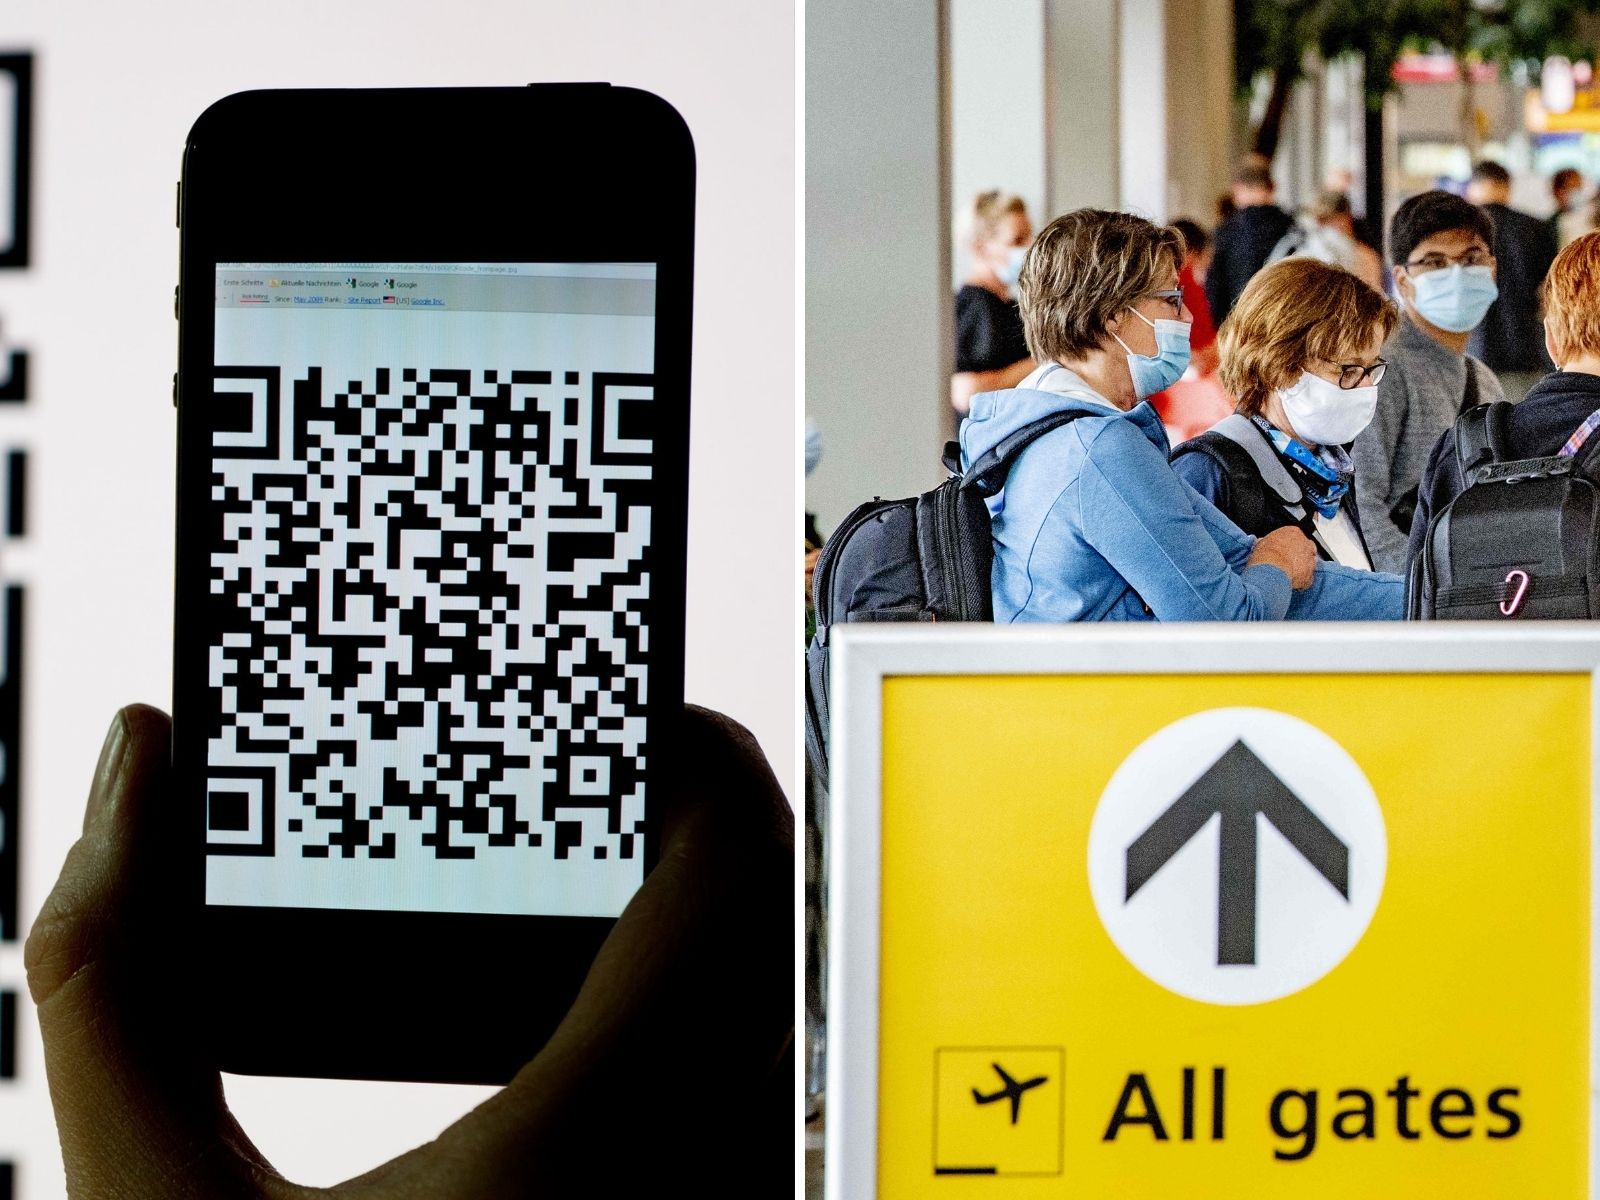 Composite image shows a woman holding a smartphone to a computer monitor displaying a QR, travelers going on holiday at Schiphol Airport in Amsterdam, Netherlands.